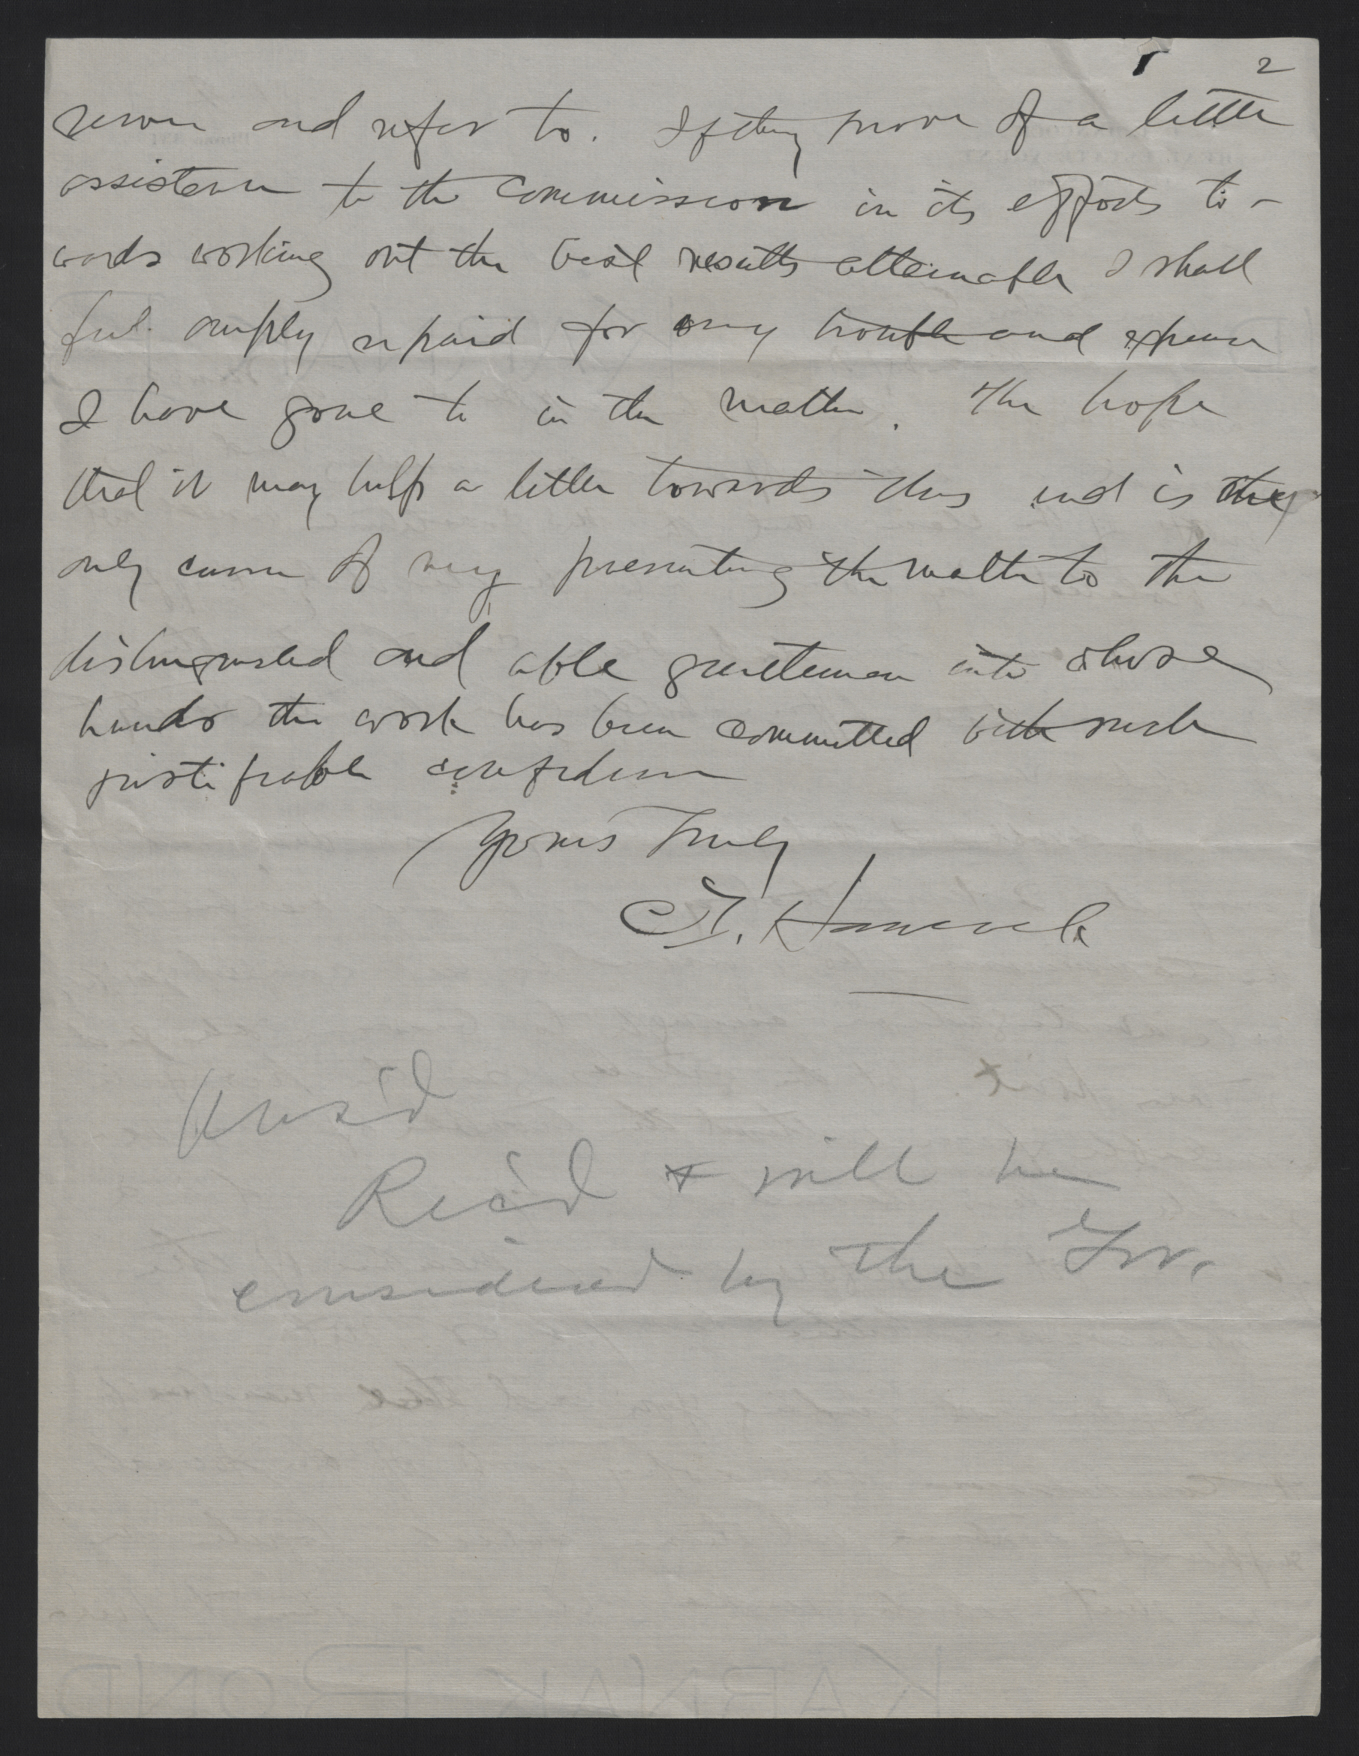 Letter from Hancock to Craig, January 3, 1913, page 2